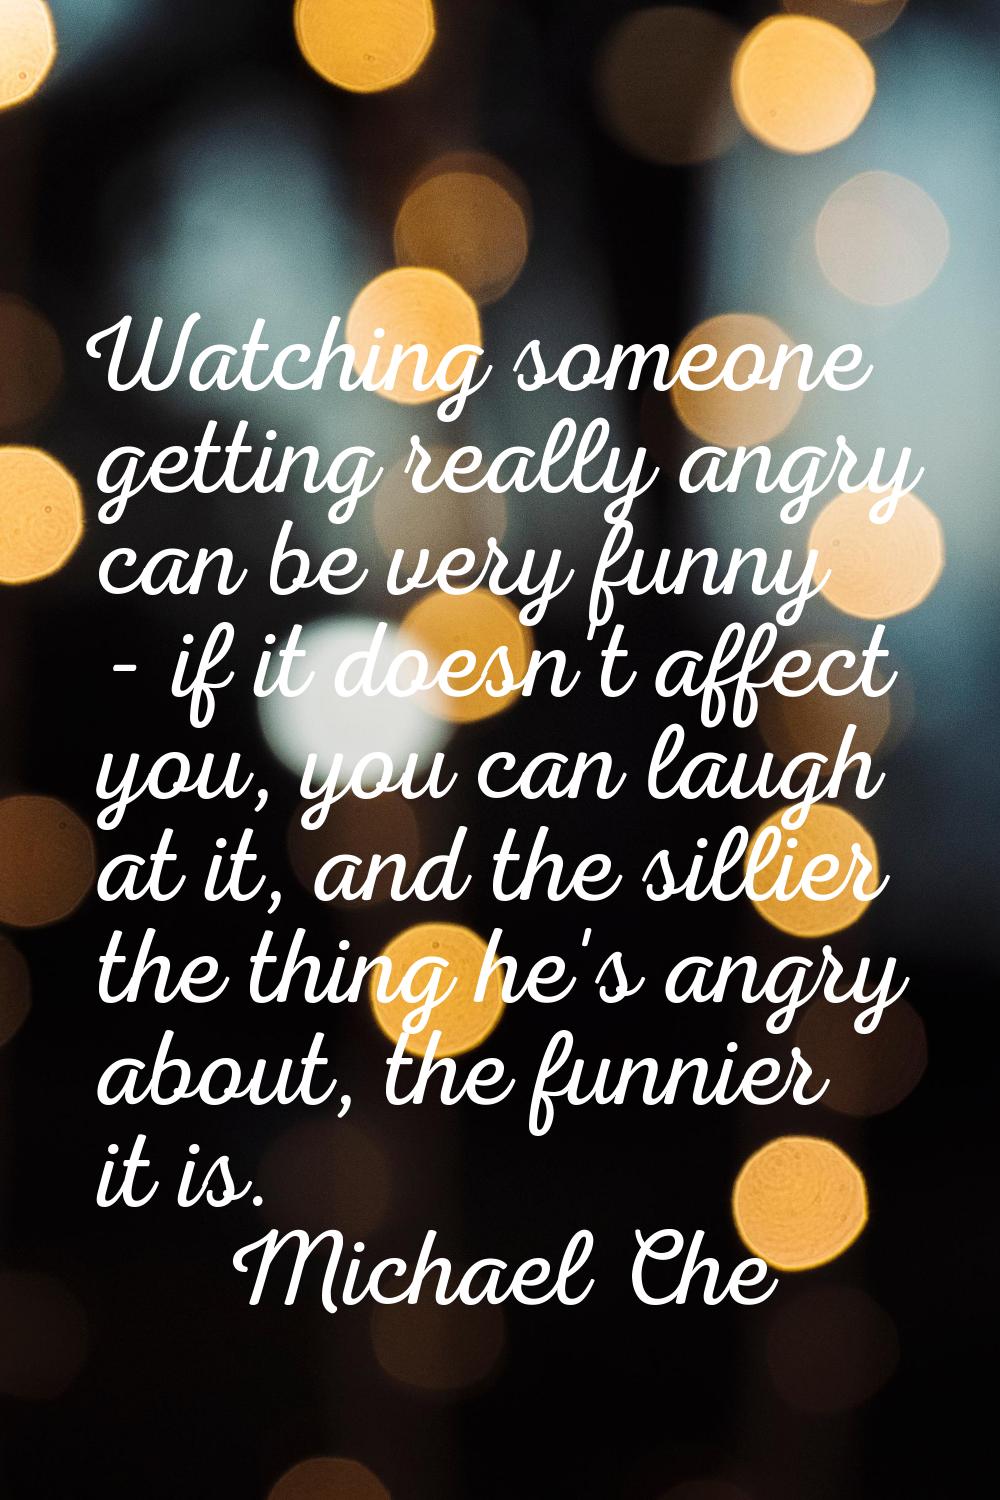 Watching someone getting really angry can be very funny - if it doesn't affect you, you can laugh a